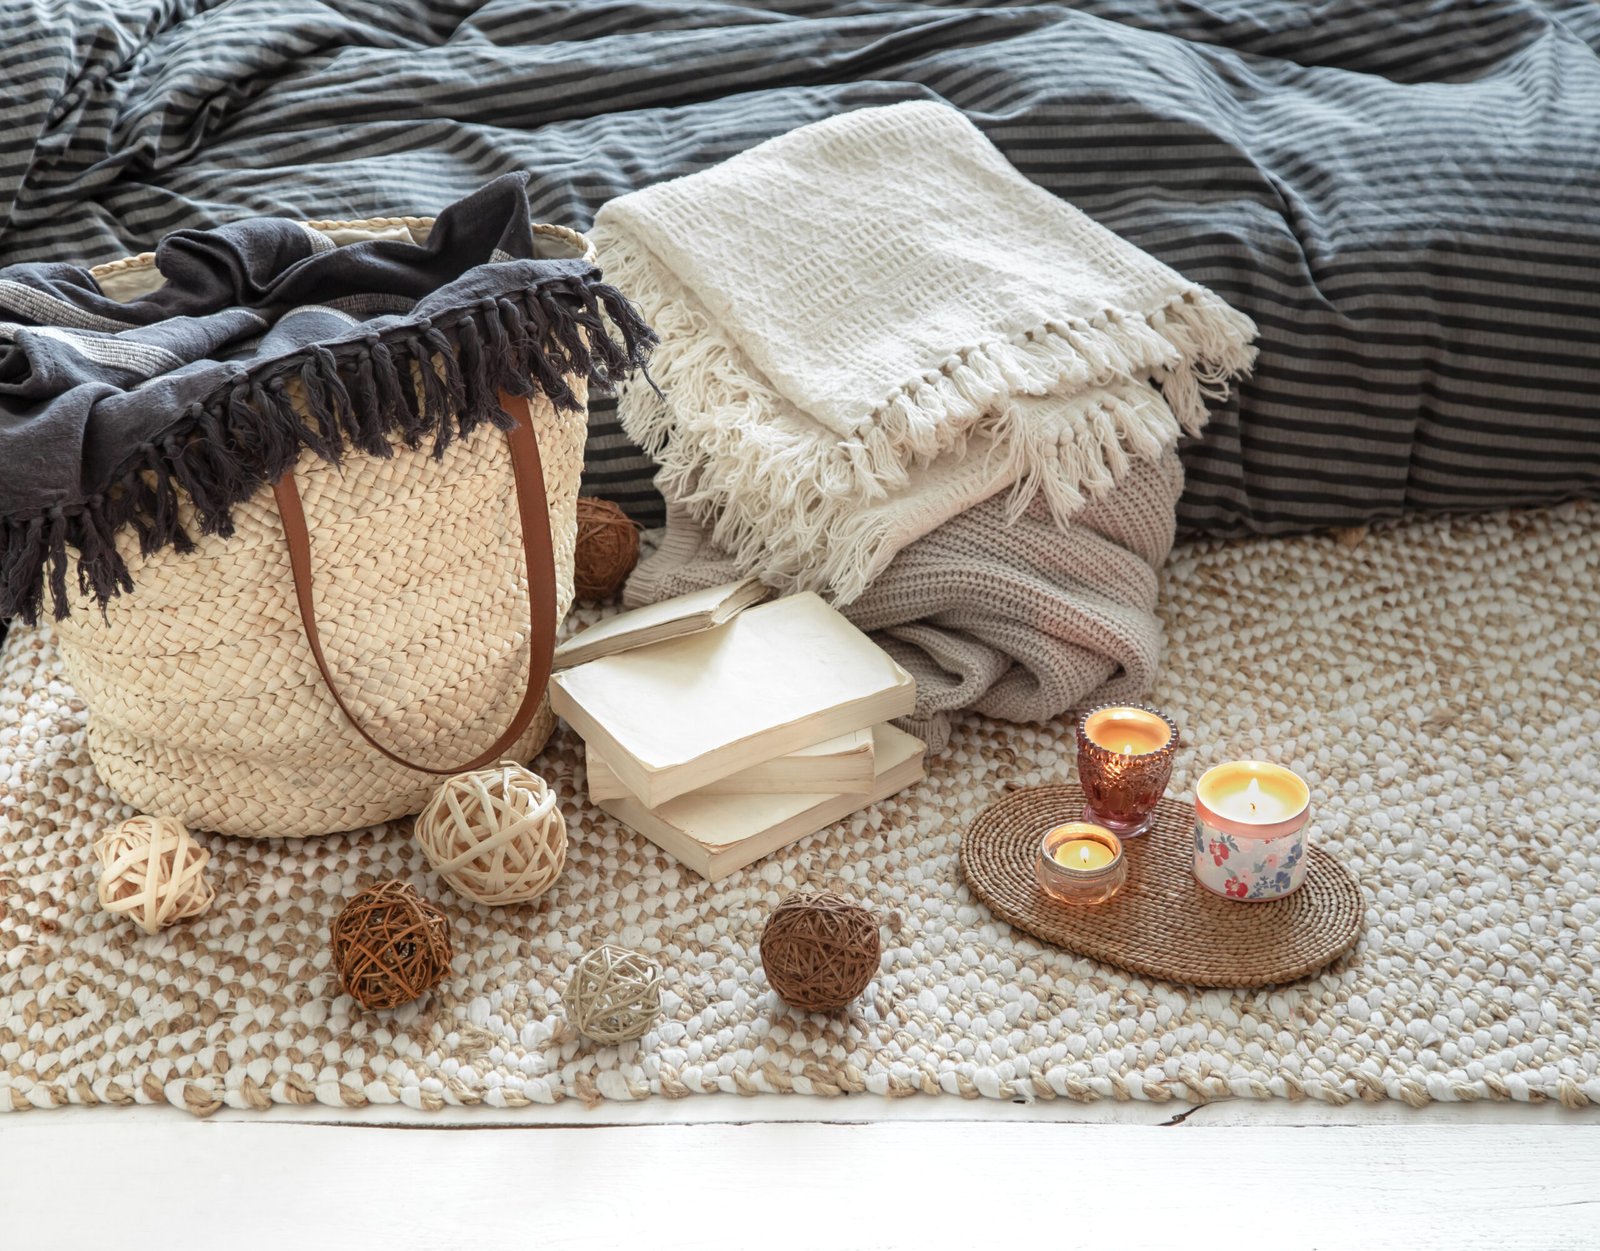 Decorative items in a cozy home interior with wicker straw large bag, and decorative elements.